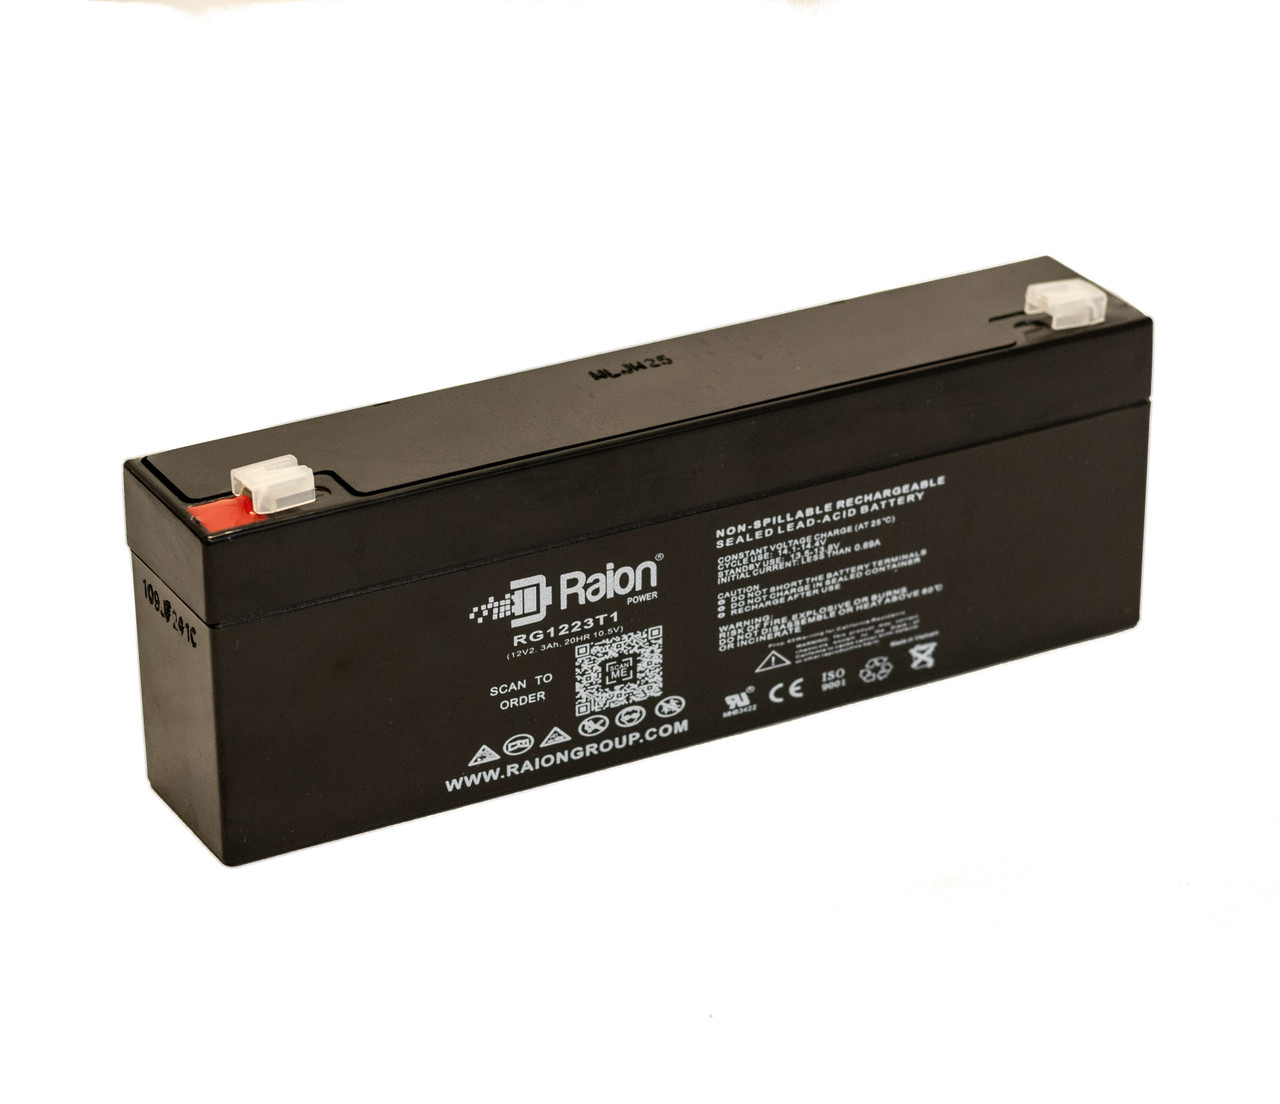 Raion Power RG1223T1 Replacement Battery for Portalac PE12Vl.9